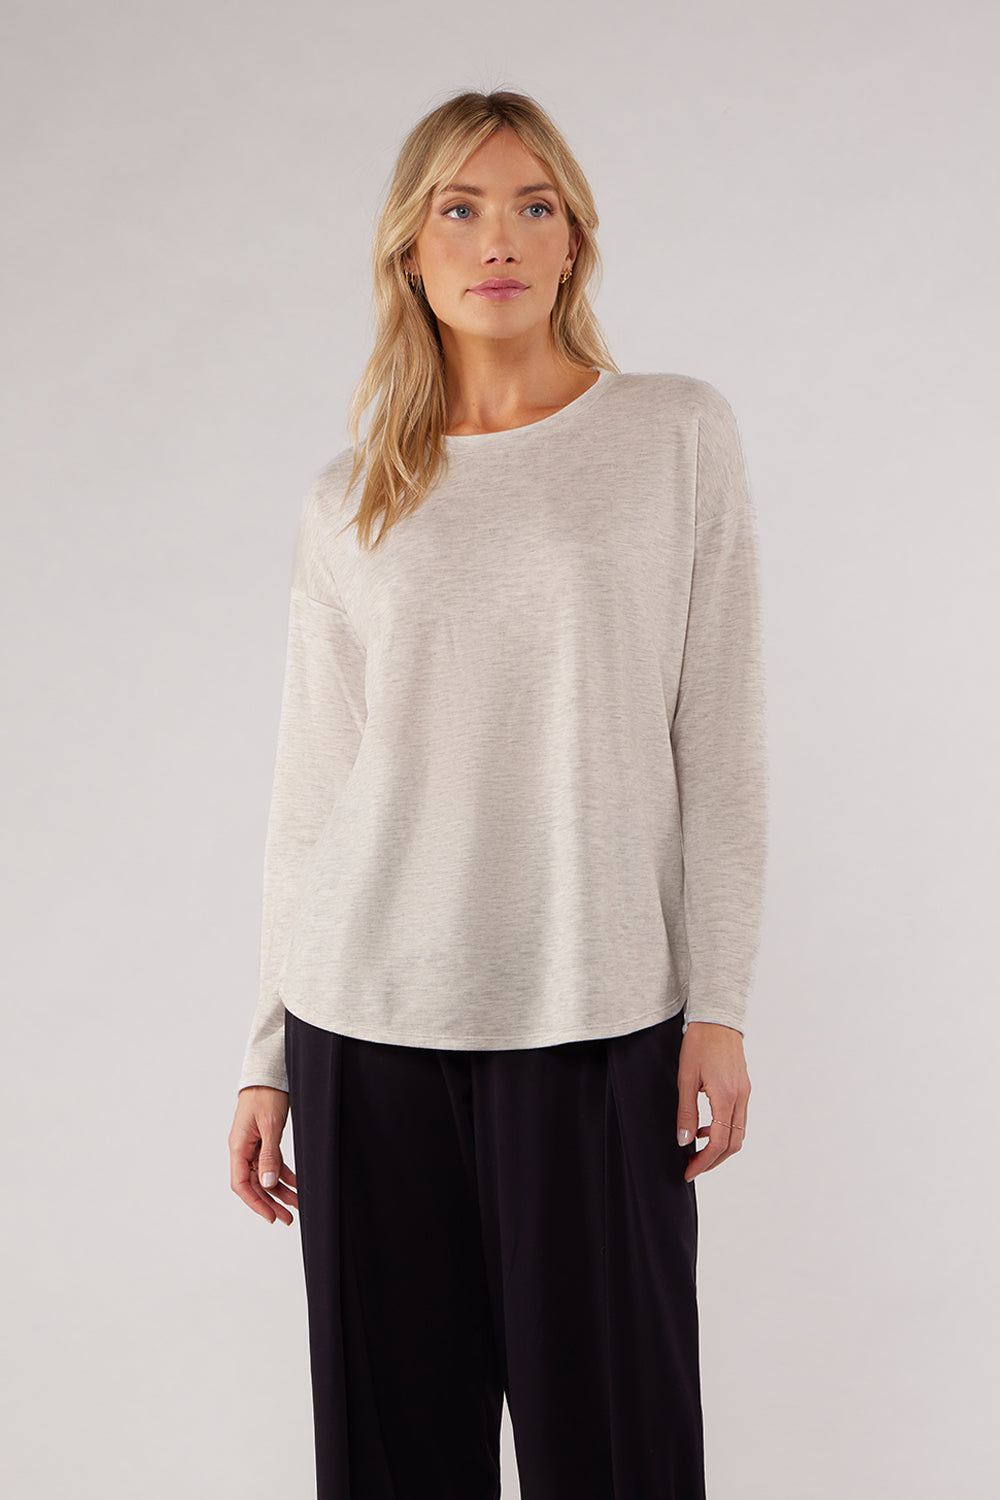 PARKER 3/4 SLEEVE TOP - HEATHER PRL GRY